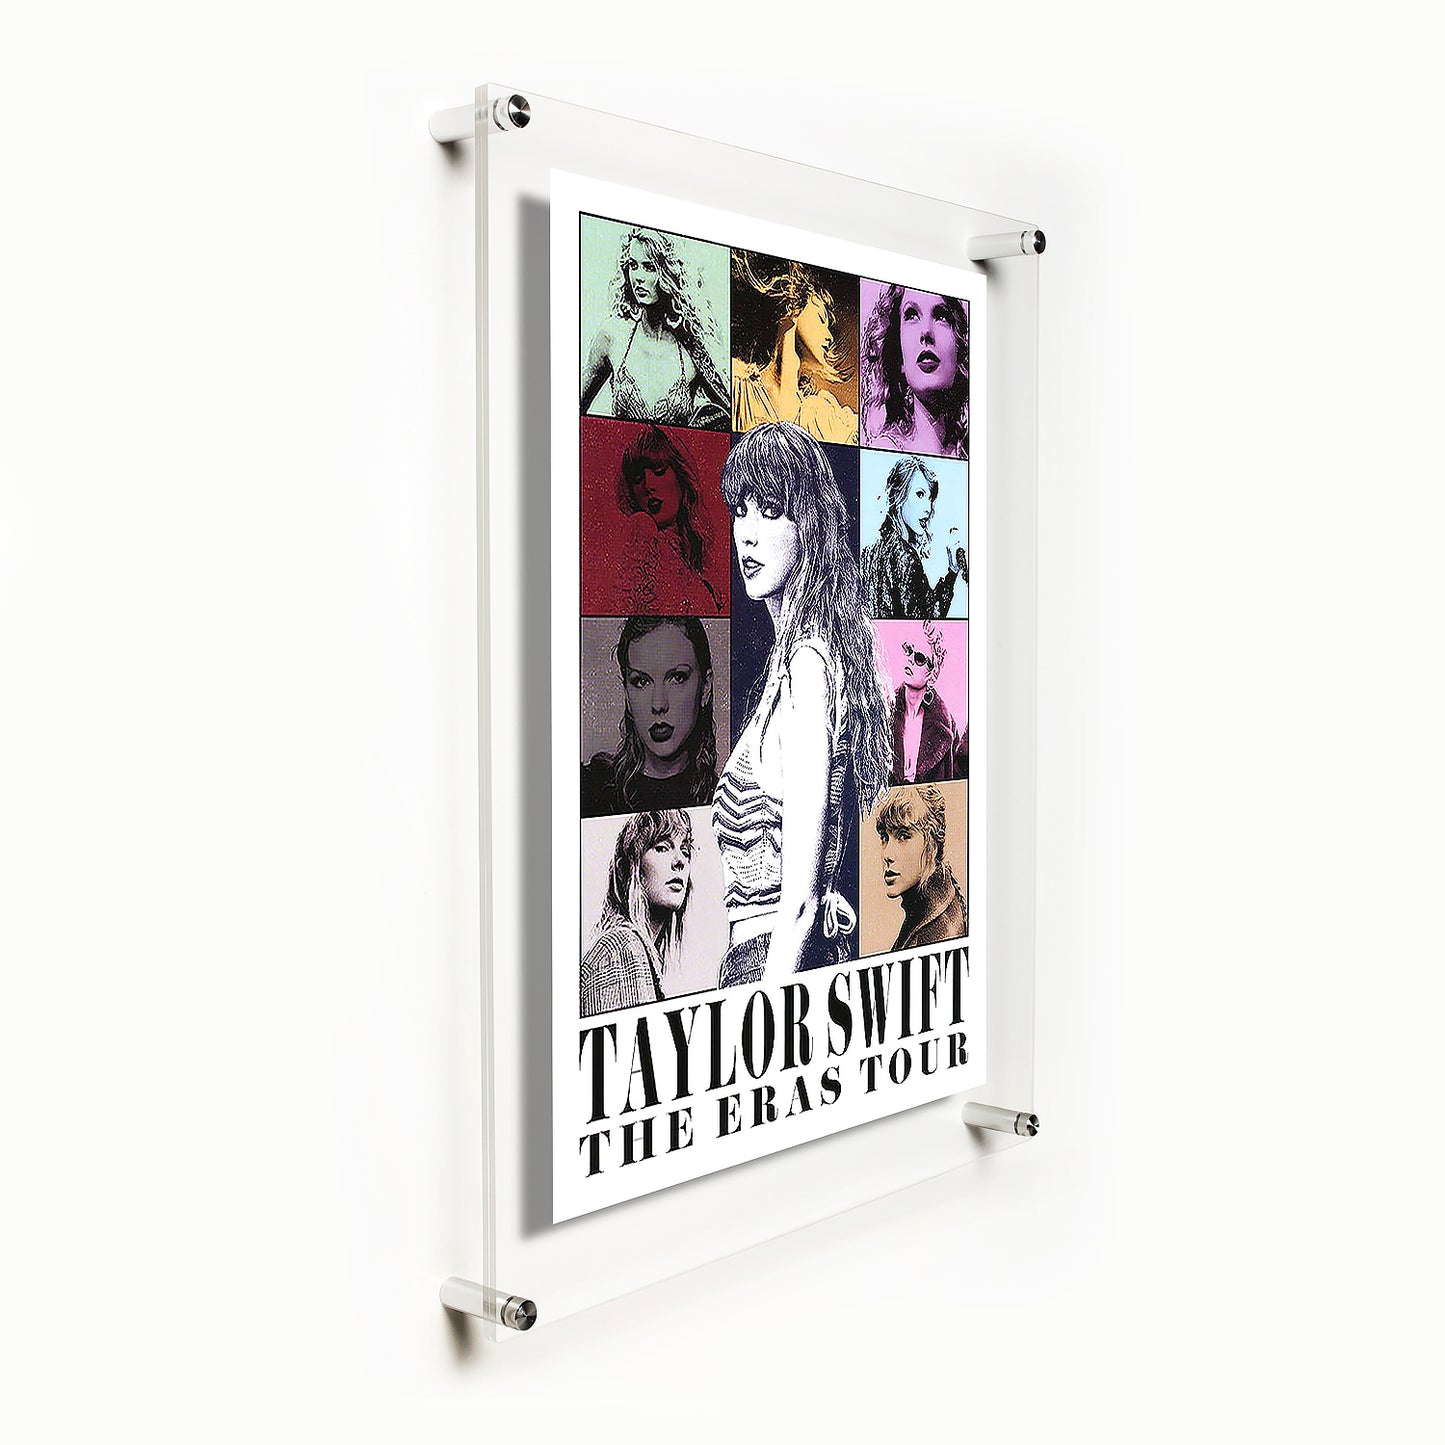 18x24" Floating Acrylic Poster Frame (Frame Size 21x27")